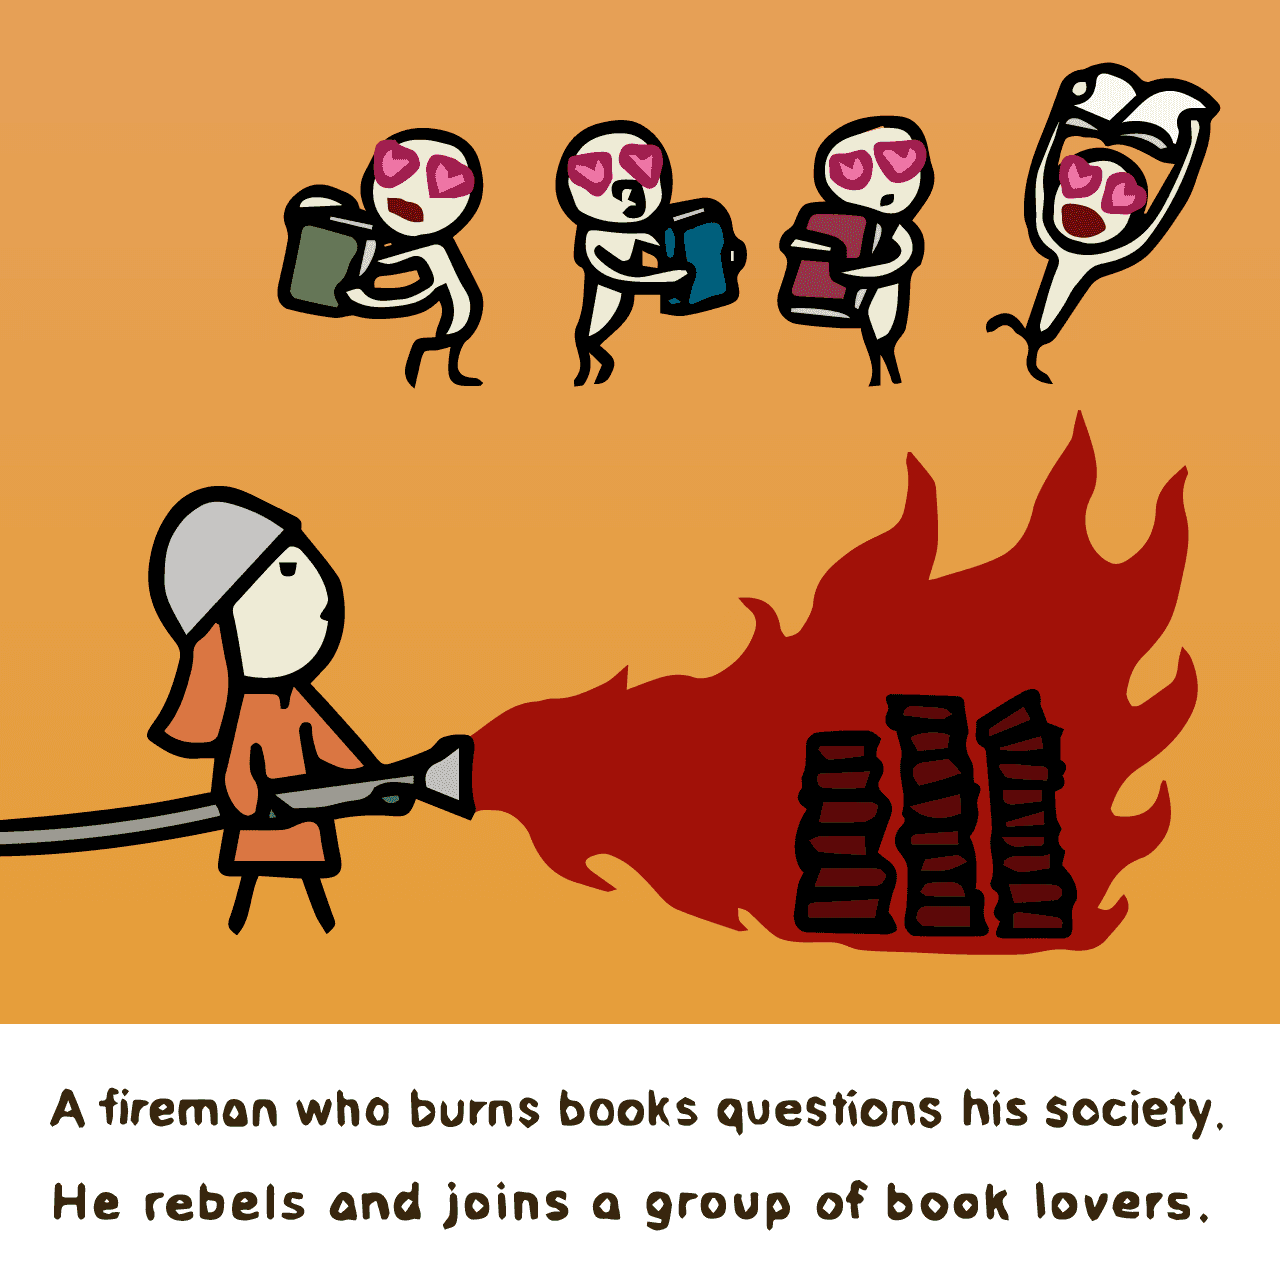 Ray Bradbury "Fahrenheit 451 : A fireman who burns books questions his society. He rebels and joins a group of book lovers."